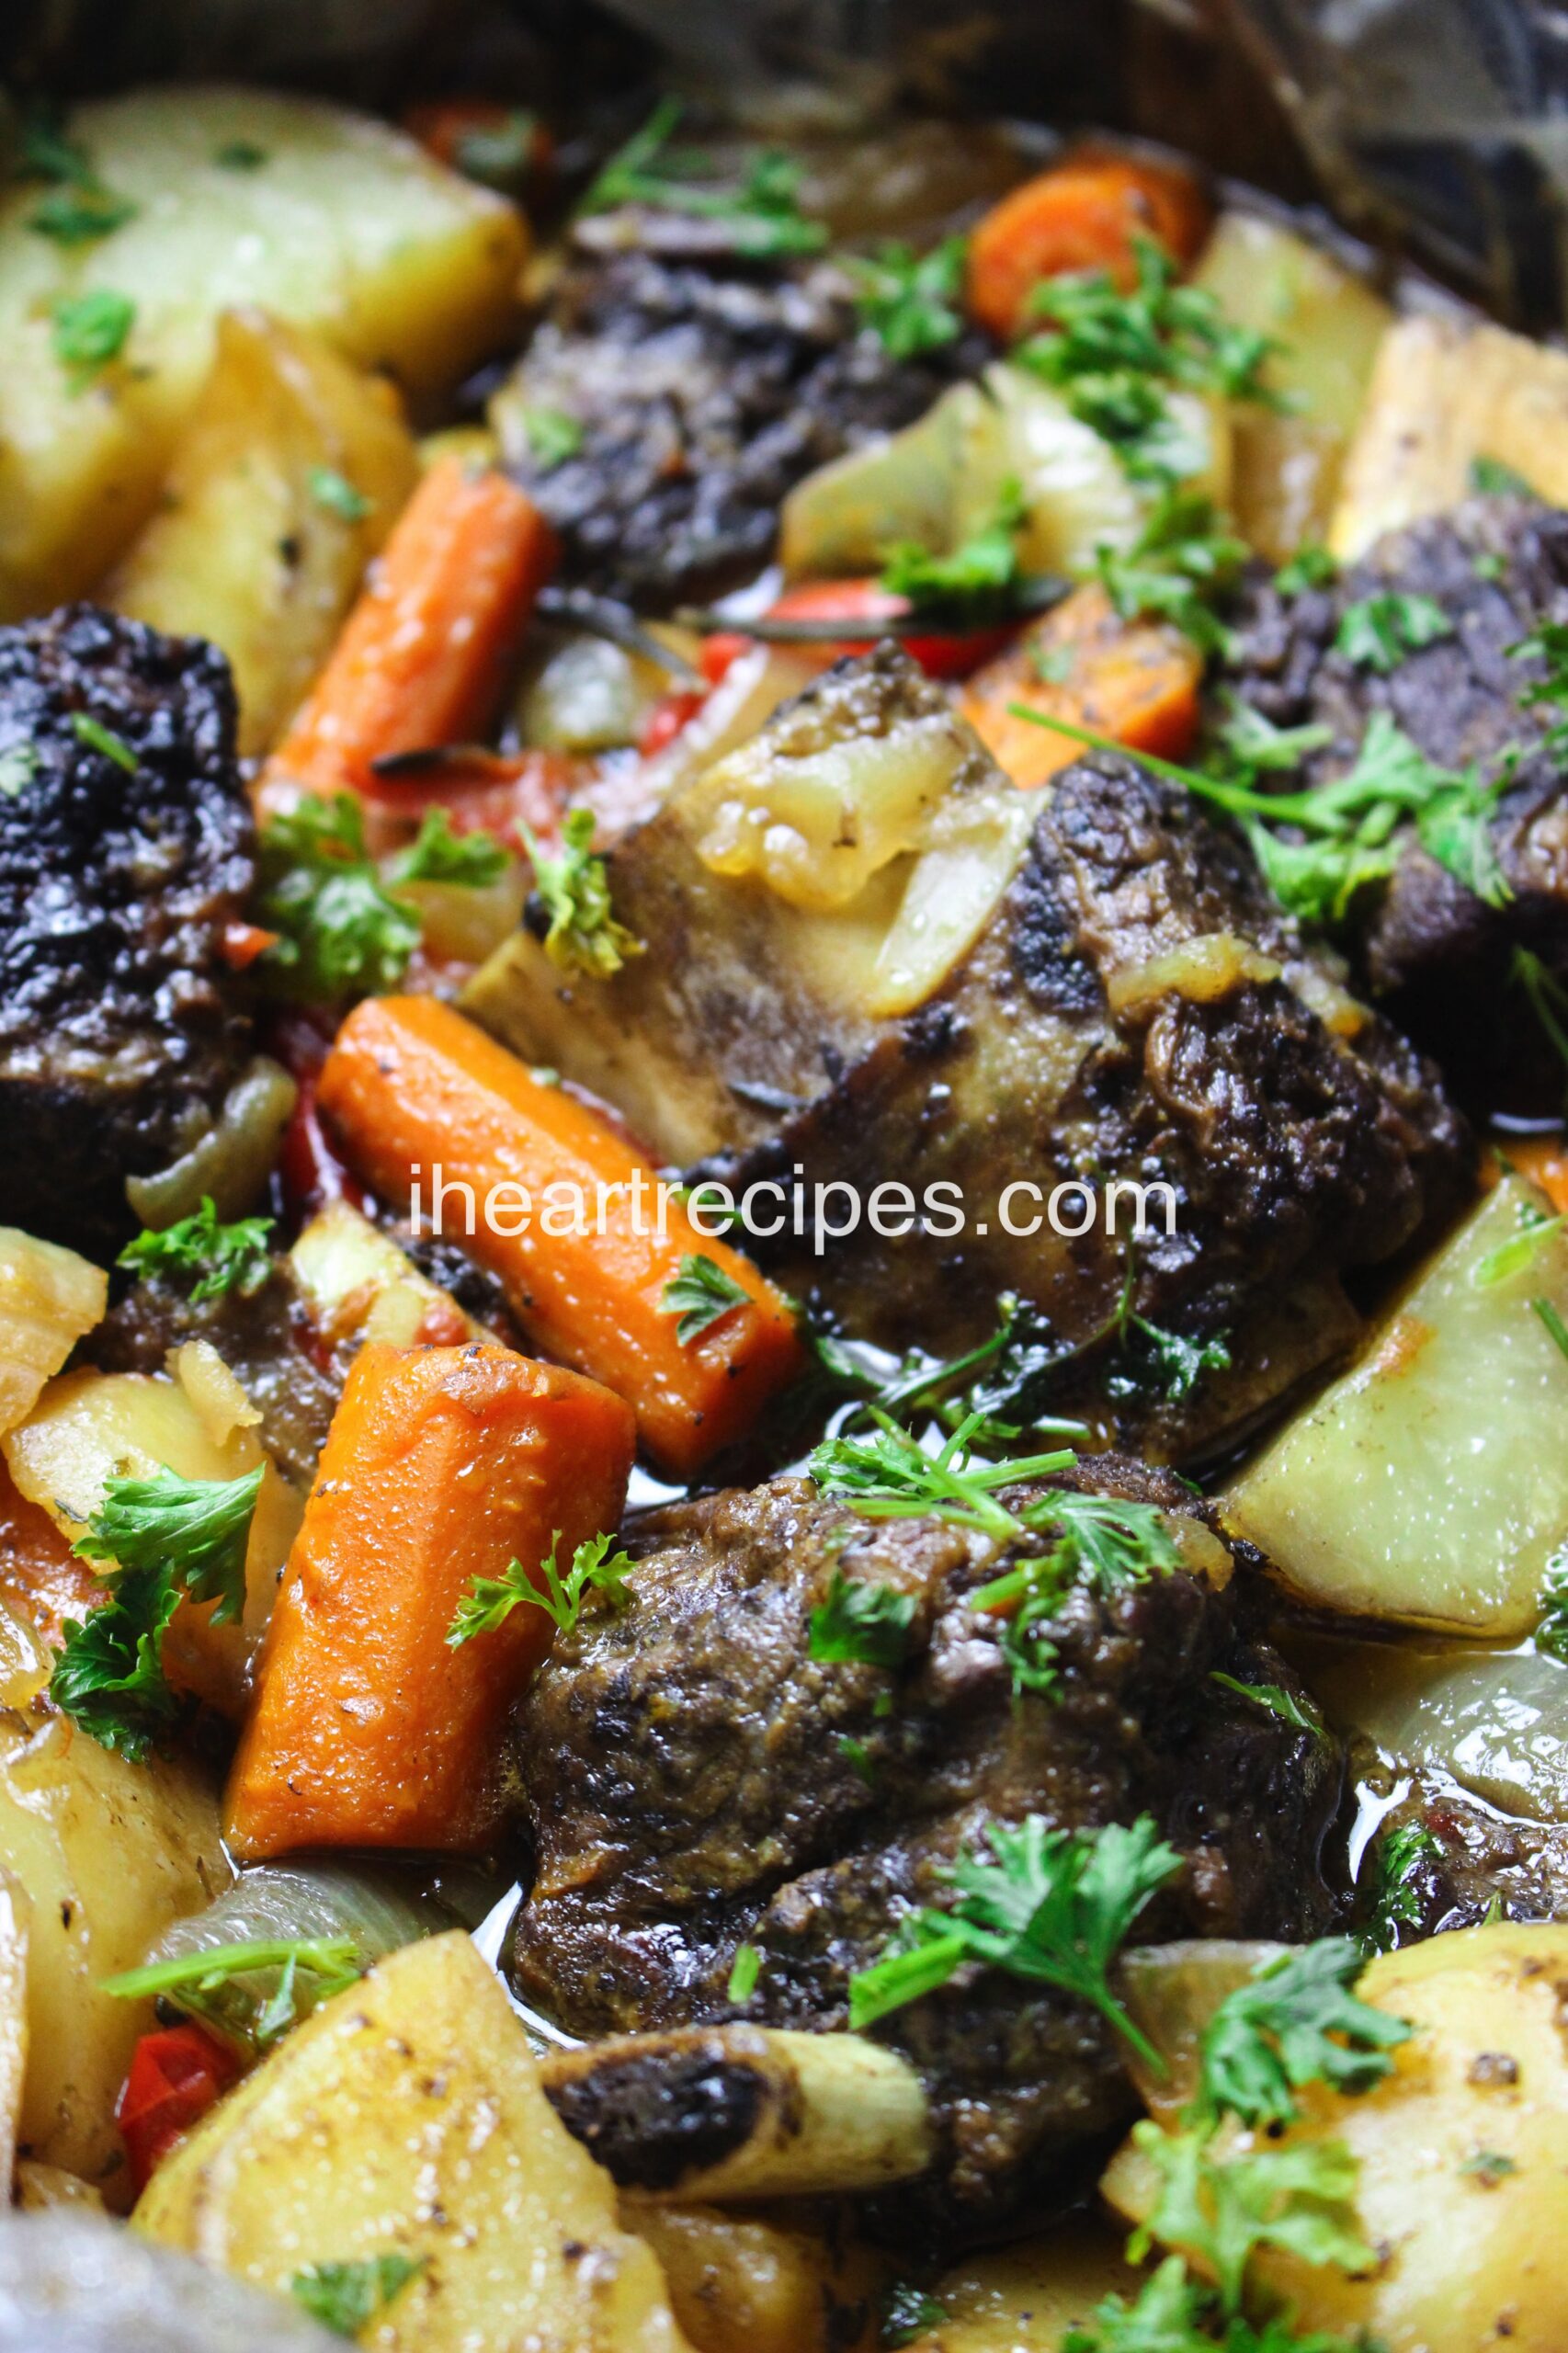 Slow Cooker Beef Short Ribs - Craving Tasty